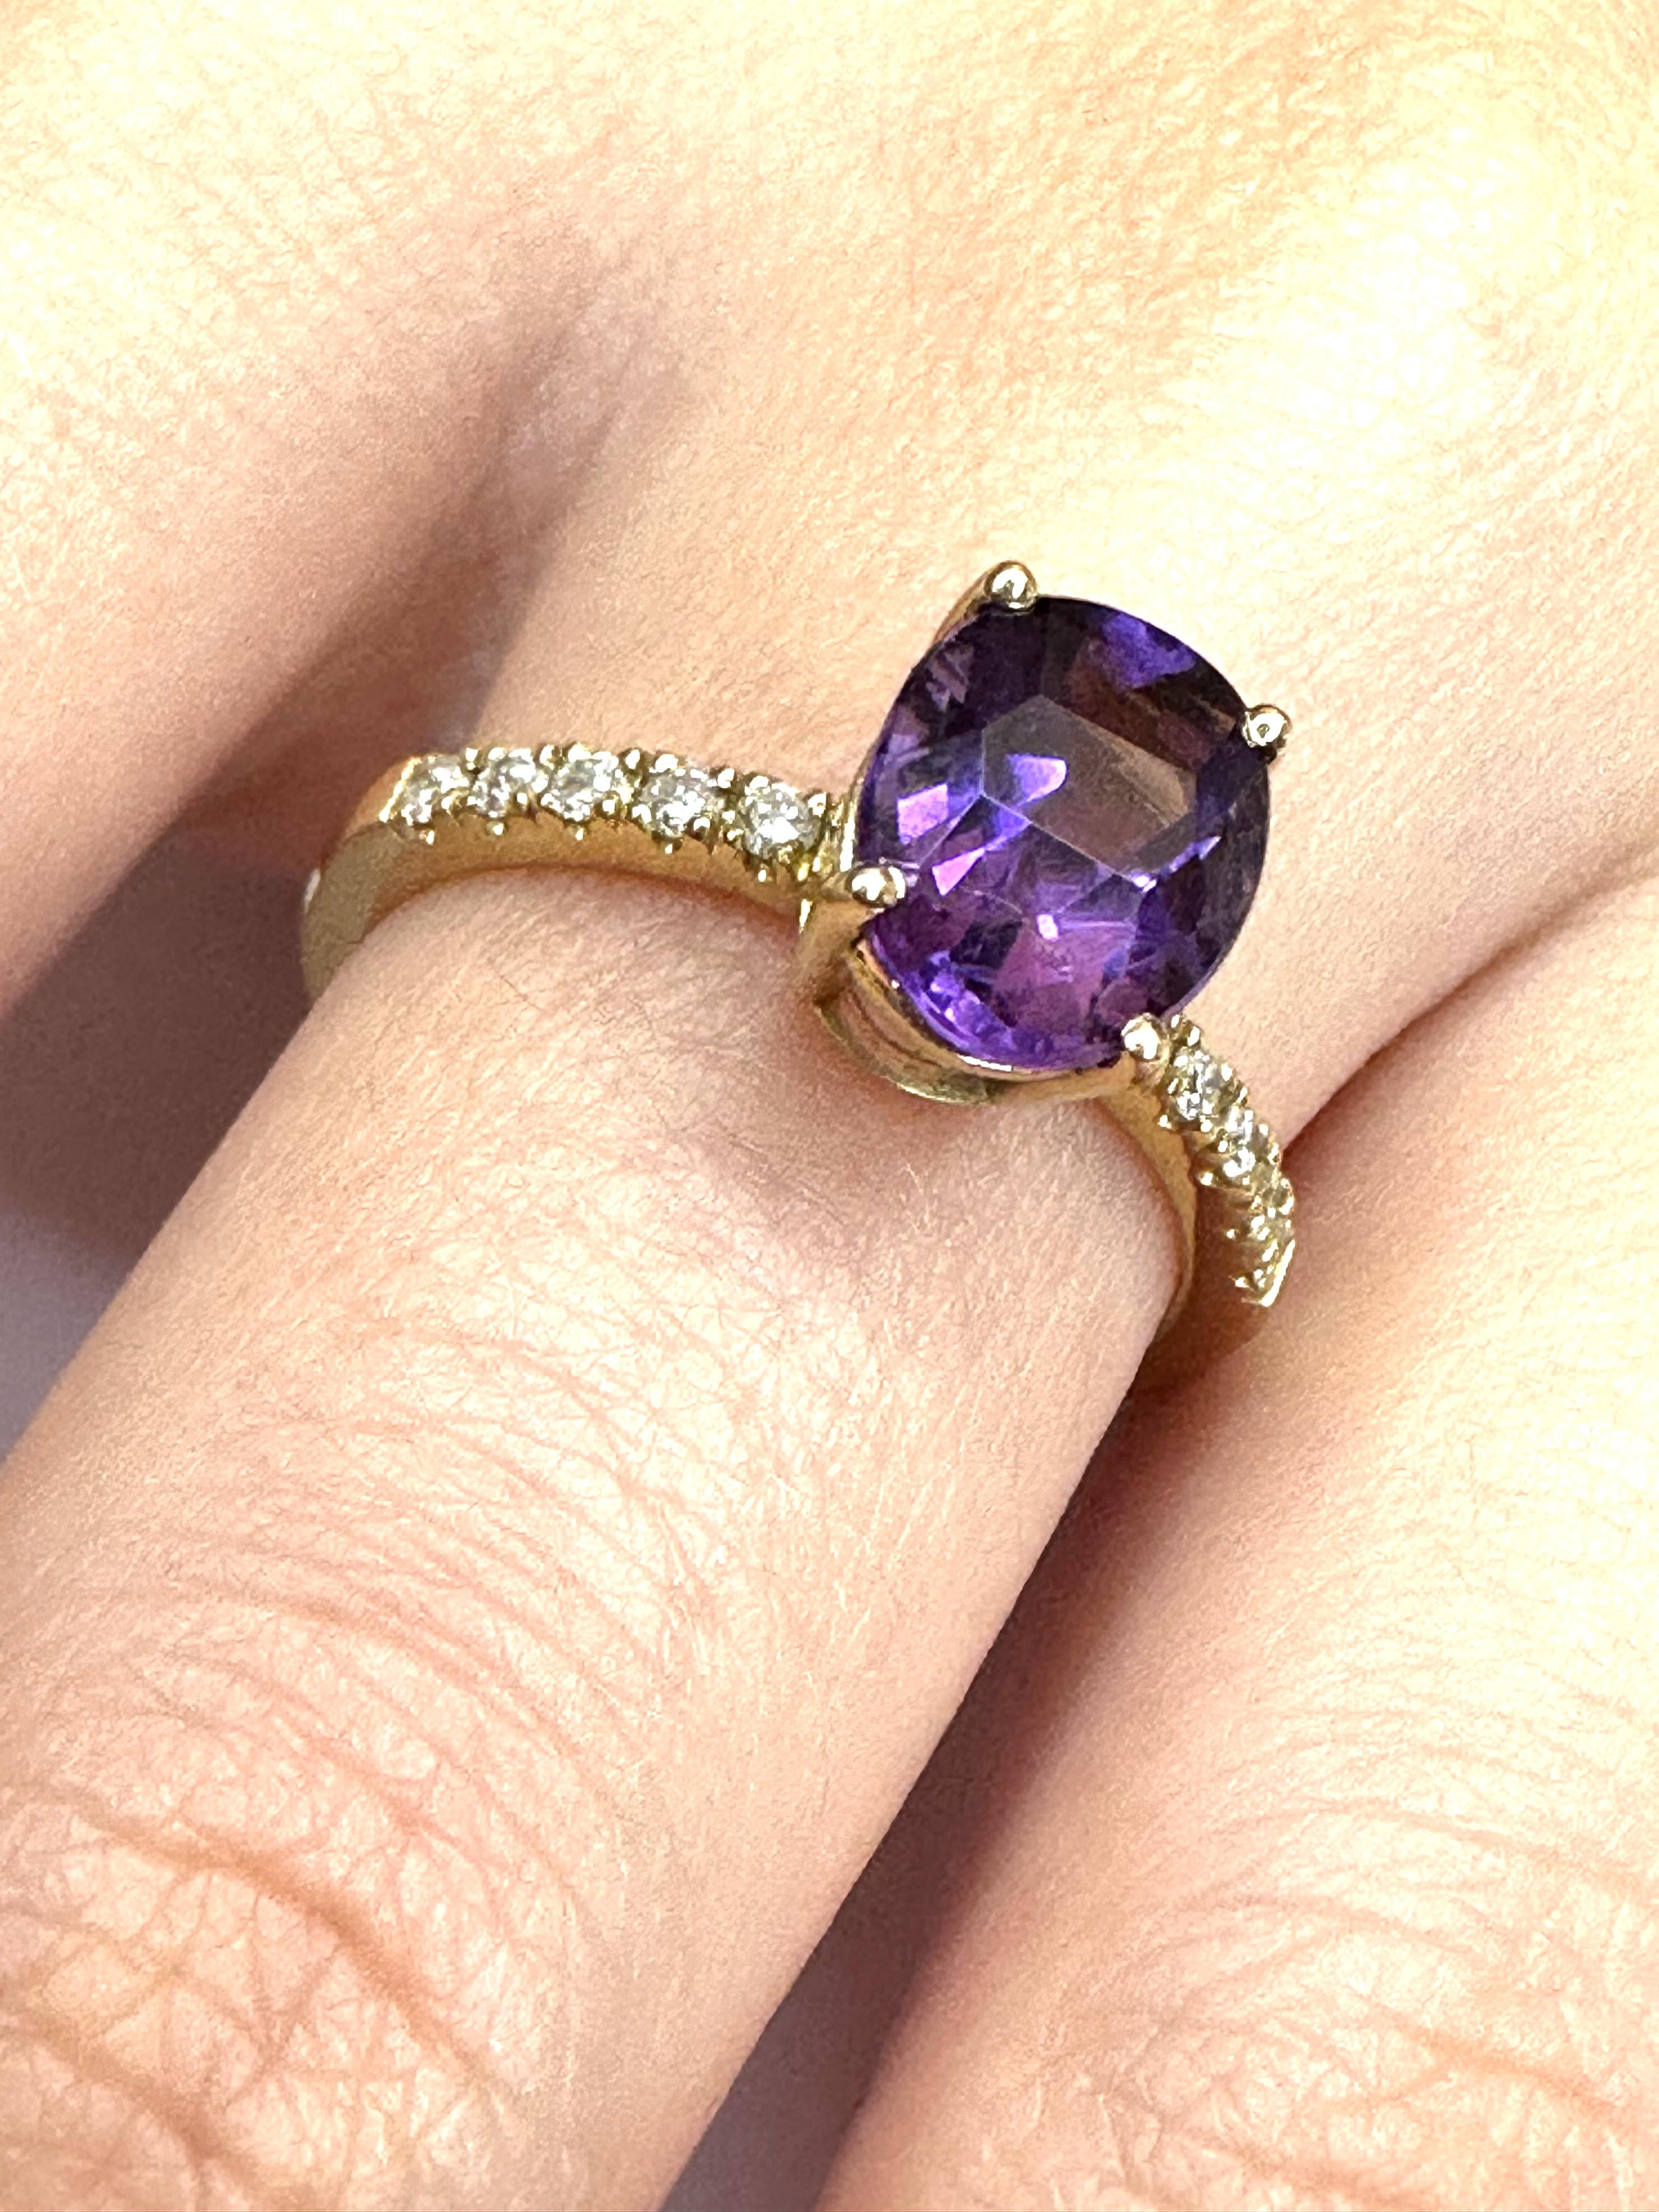 Eliania Rosetti's studio in São Paulo/Brazil designed this elegant solitaire and engagement ring in 3D programming.
Its main stone is an oval shaped amethyst measuring 9 x 7mm and 5 diamonds measuring 1.5mm on each side of this stone, totaling 10